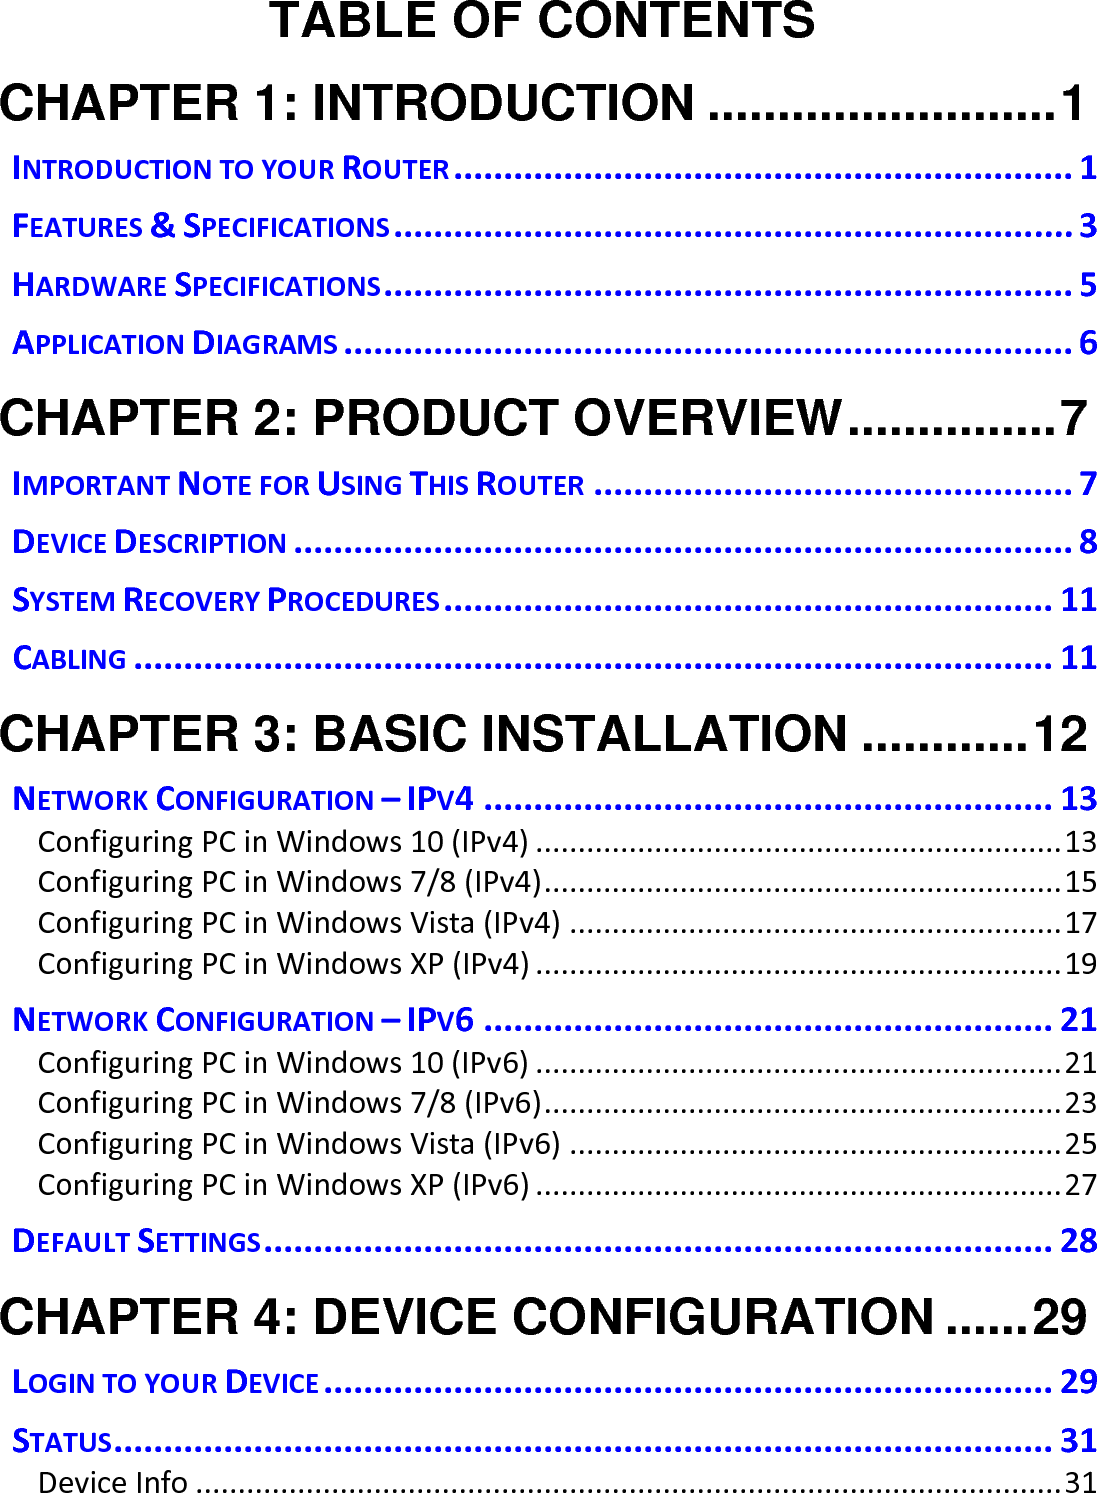   TABLE OF CONTENTS CHAPTER 1: INTRODUCTION ......................... 1 INTRODUCTION TO YOUR ROUTER .............................................................. 1 FEATURES &amp; SPECIFICATIONS .................................................................... 3 HARDWARE SPECIFICATIONS ..................................................................... 5 APPLICATION DIAGRAMS ......................................................................... 6 CHAPTER 2: PRODUCT OVERVIEW ............... 7 IMPORTANT NOTE FOR USING THIS ROUTER ................................................ 7 DEVICE DESCRIPTION .............................................................................. 8 SYSTEM RECOVERY PROCEDURES ............................................................. 11 CABLING ............................................................................................ 11 CHAPTER 3: BASIC INSTALLATION ............ 12 NETWORK CONFIGURATION – IPV4 ......................................................... 13 Configuring PC in Windows 10 (IPv4) .............................................................. 13 Configuring PC in Windows 7/8 (IPv4) ............................................................. 15 Configuring PC in Windows Vista (IPv4) .......................................................... 17 Configuring PC in Windows XP (IPv4) .............................................................. 19 NETWORK CONFIGURATION – IPV6 ......................................................... 21 Configuring PC in Windows 10 (IPv6) .............................................................. 21 Configuring PC in Windows 7/8 (IPv6) ............................................................. 23 Configuring PC in Windows Vista (IPv6) .......................................................... 25 Configuring PC in Windows XP (IPv6) .............................................................. 27 DEFAULT SETTINGS ............................................................................... 28 CHAPTER 4: DEVICE CONFIGURATION ...... 29 LOGIN TO YOUR DEVICE ......................................................................... 29 STATUS .............................................................................................. 31 Device Info ...................................................................................................... 31 